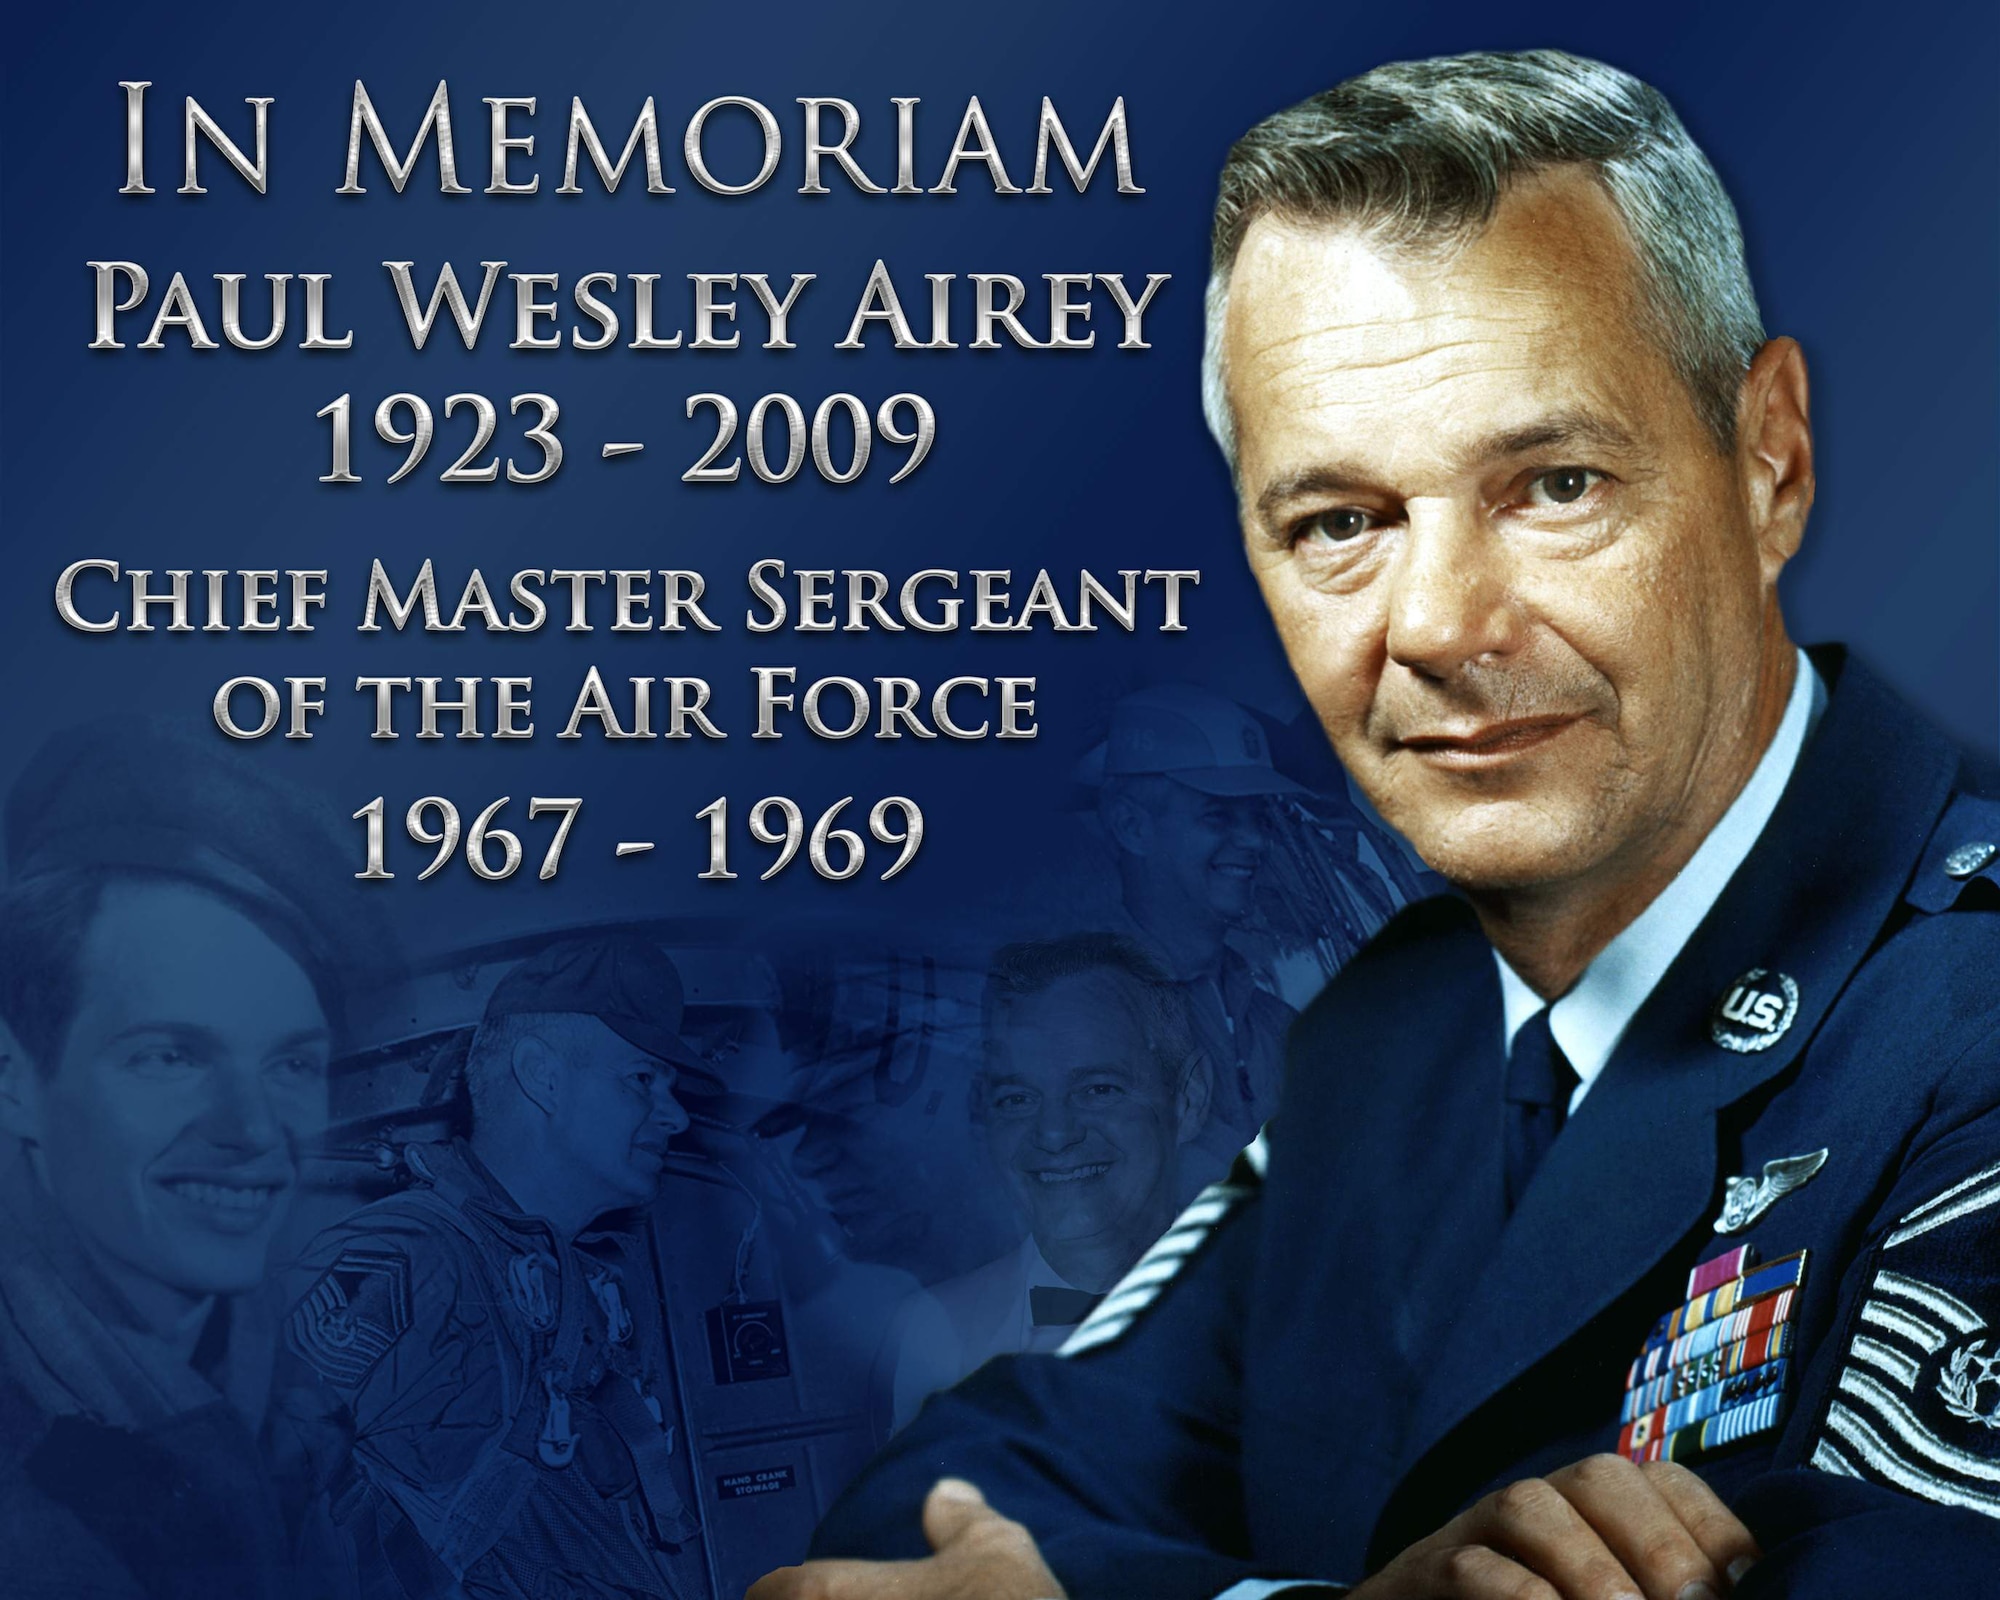 Former Chief Master Sergeant of the Air Force Paul Wesley Airey died March 11 in Panama City, Fla. Chief Airey held the top enlisted from April 3, 1967 to July 31, 1969. During his tenure he worked to change loan establishments charging exorbitant rates outside the air base gates and to improve low retention during the Vietnam Conflict. Chief Airey also led a team that laid the foundation for the Weighted Airman Promotion System, a system that has stood the test of time and which is still in use today. He also advocated for an Air Force-level Senior Noncommissioned Officer Academy. Chief Airey retired August 1, 1970. (U.S. Air Force illustration/Cyndi Smith)